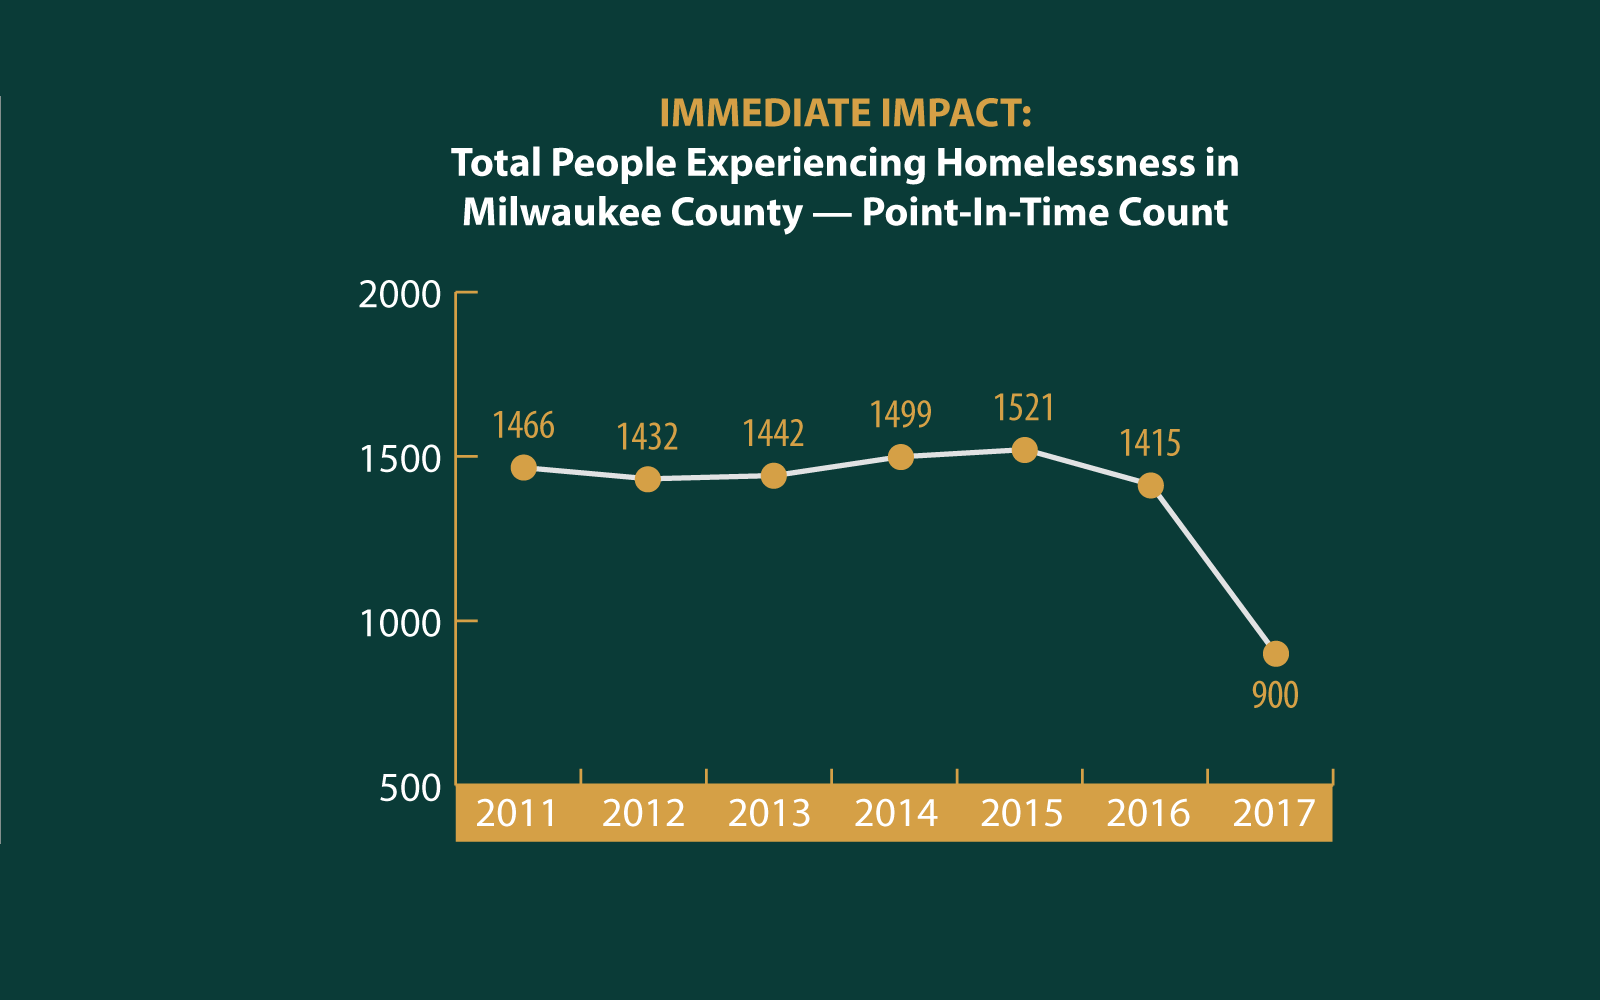 Total People Experiencing Homelessness in Milwaukee County - Point-In-Time Count